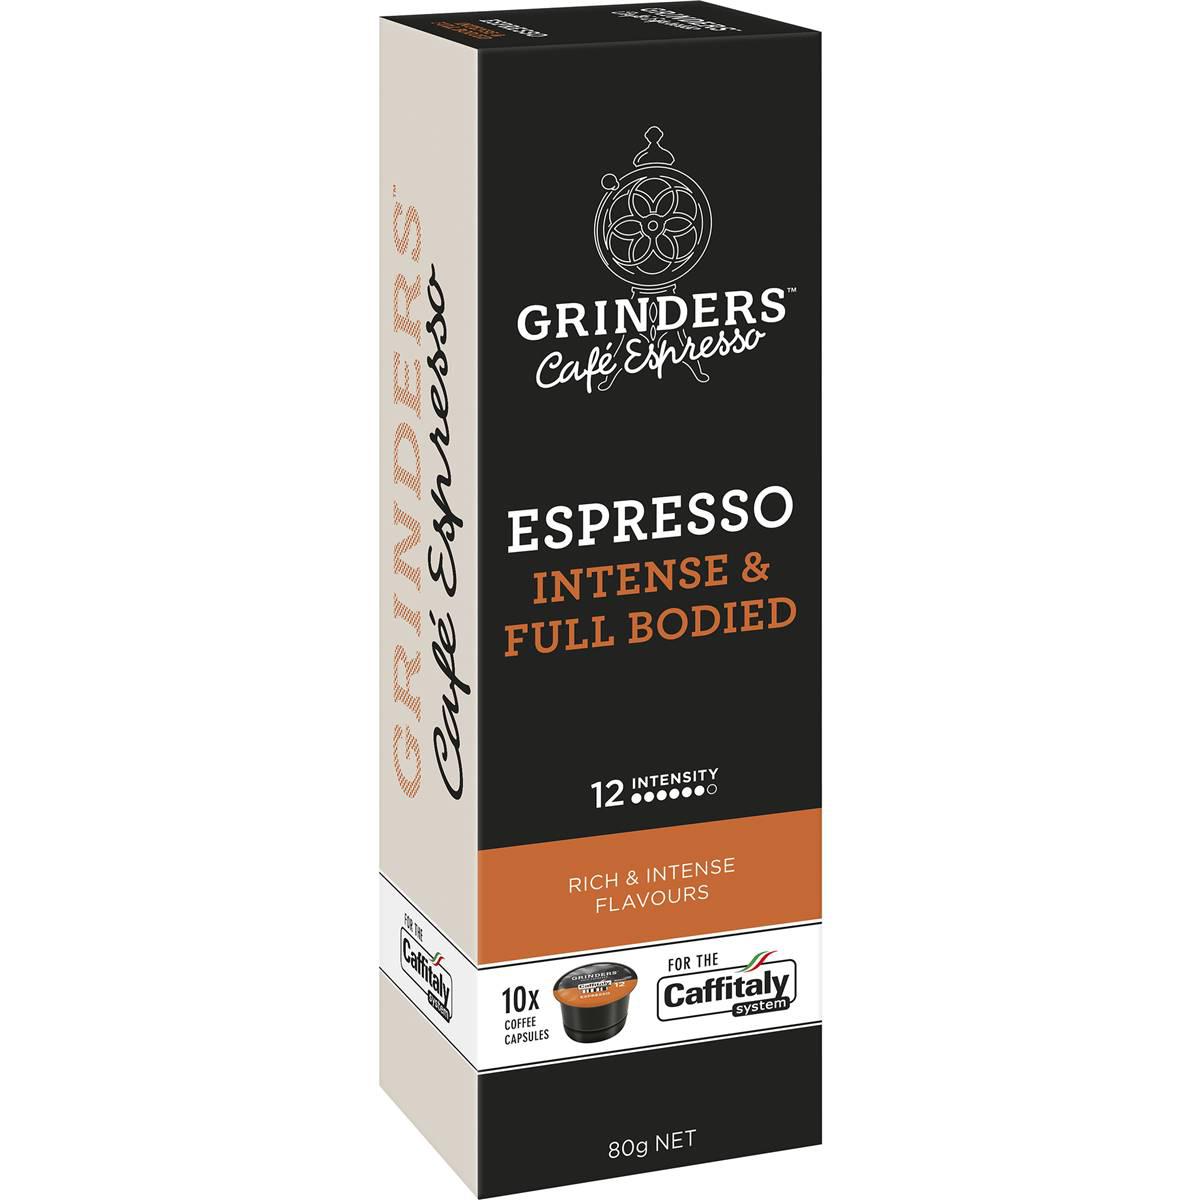 Grinders Coffee Capsules Espresso Caffitaly System 10 Pack